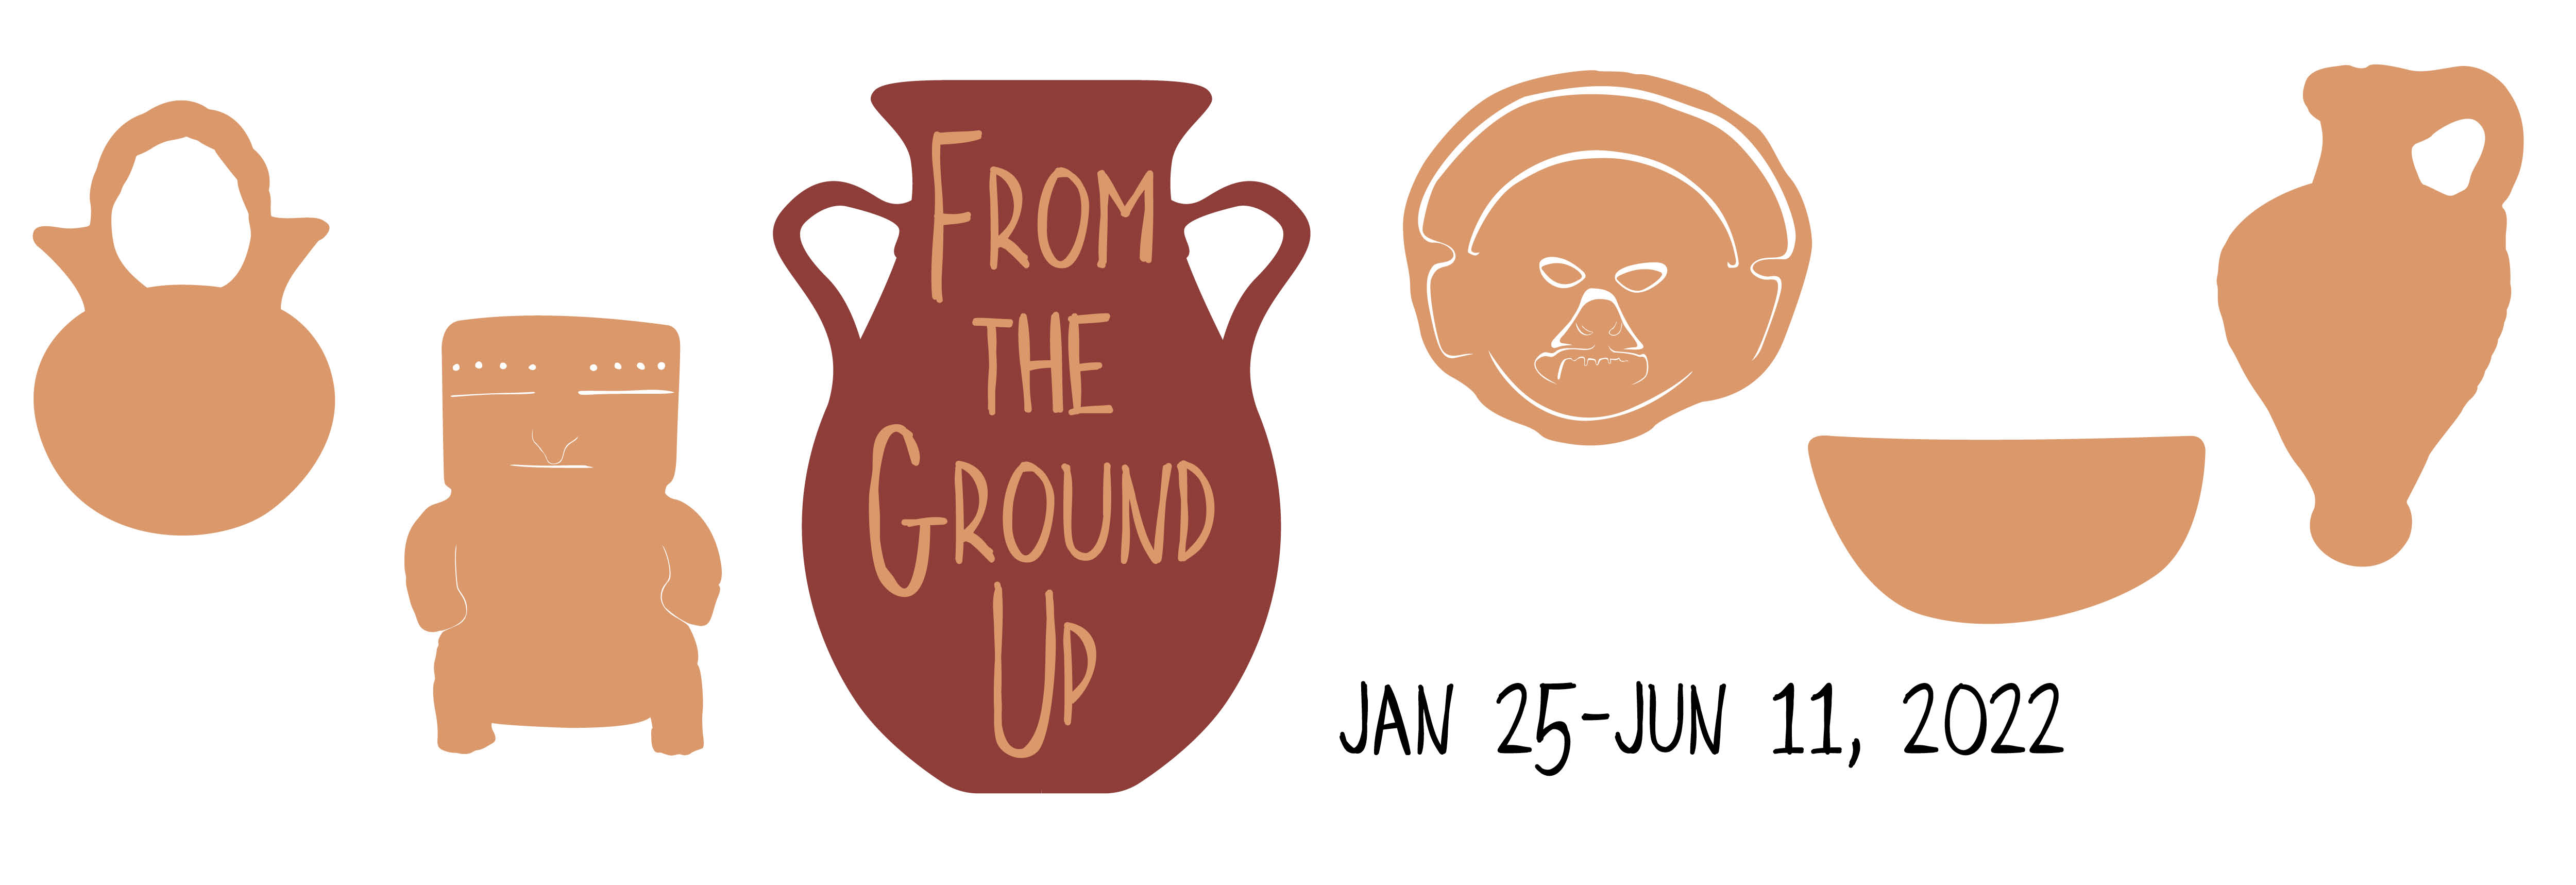 From the Ground Up January 25-June 11, 2022